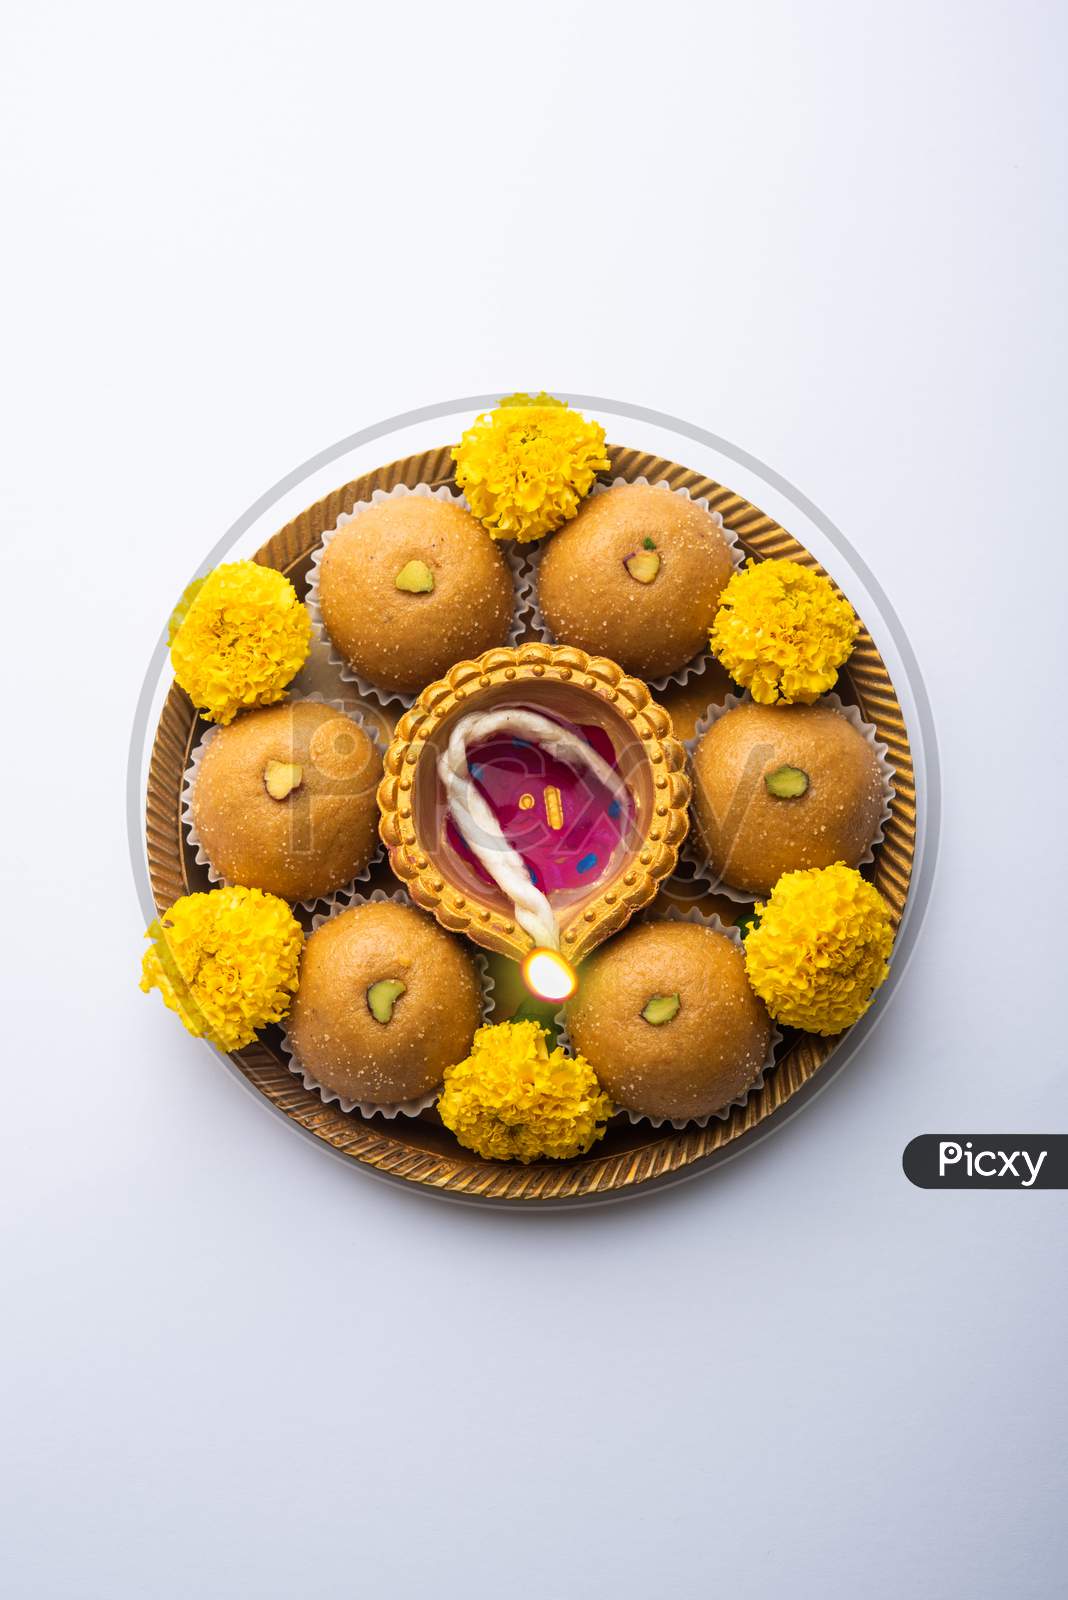 Besan Ladoo And Diwali Diya Or Clay Lamp Decorated In A Plate With Marigold Flowers - Happy Diwali Greeting